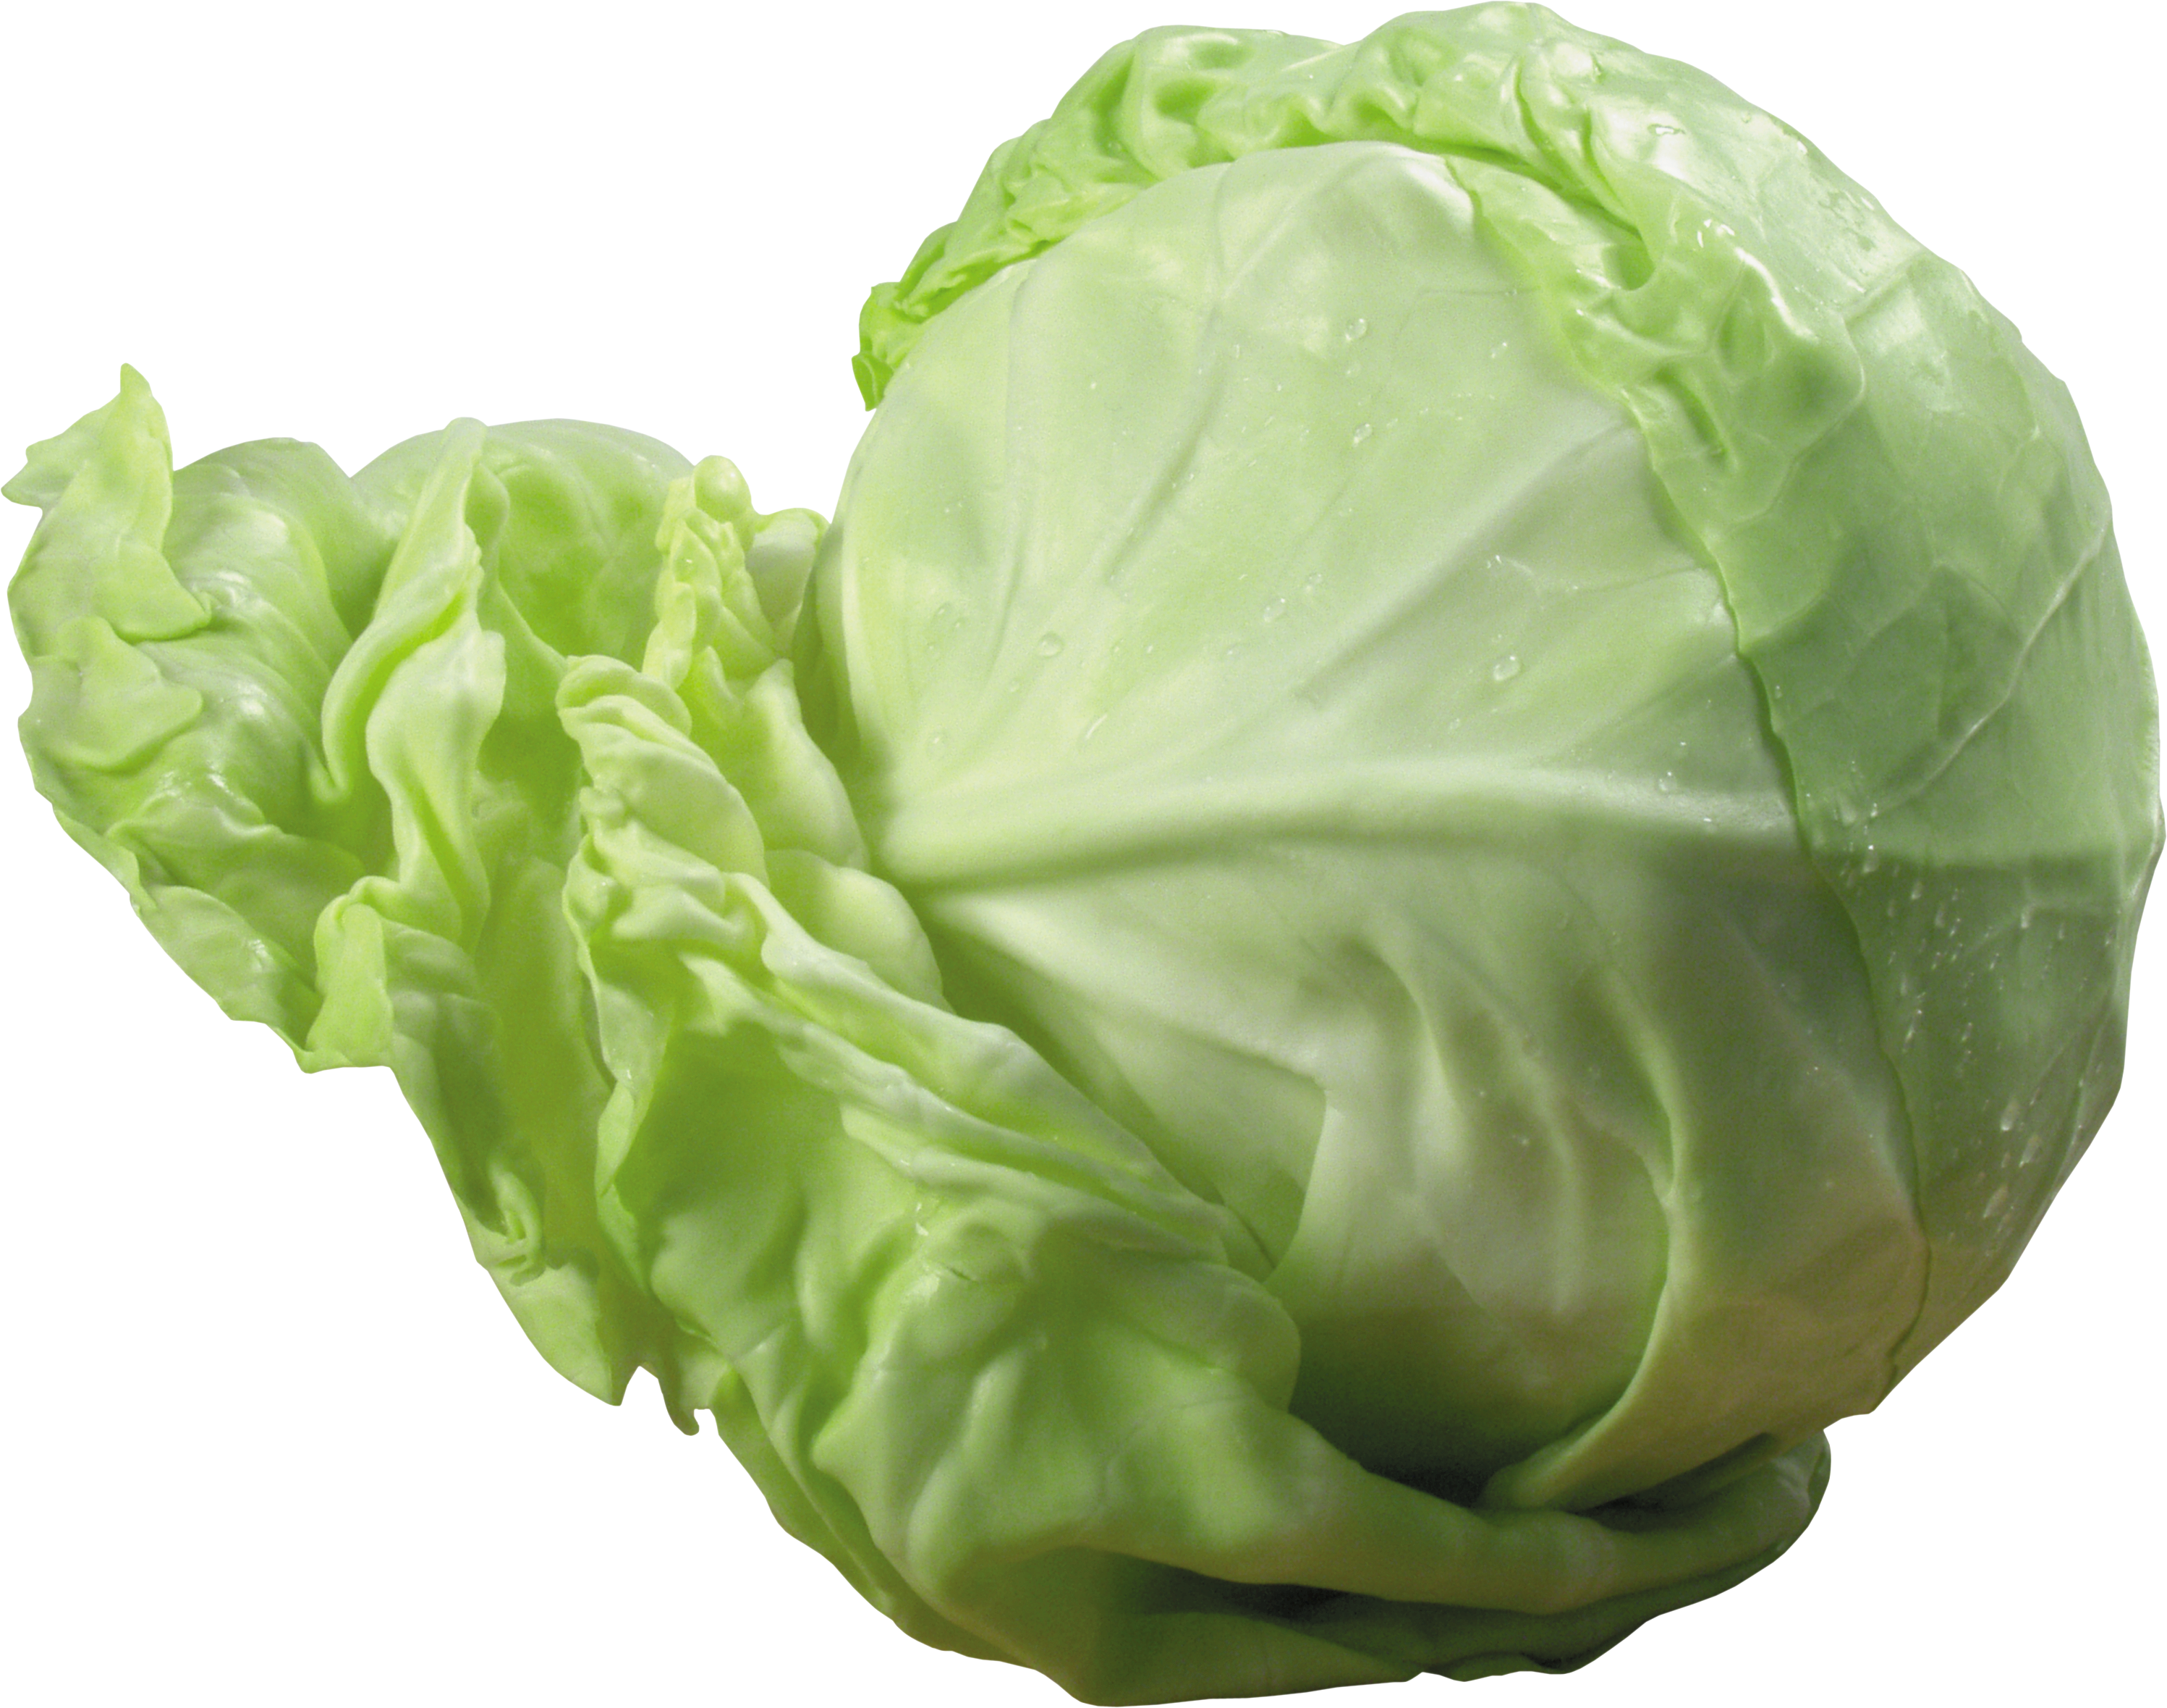 Png image . Vegetables clipart cabbage